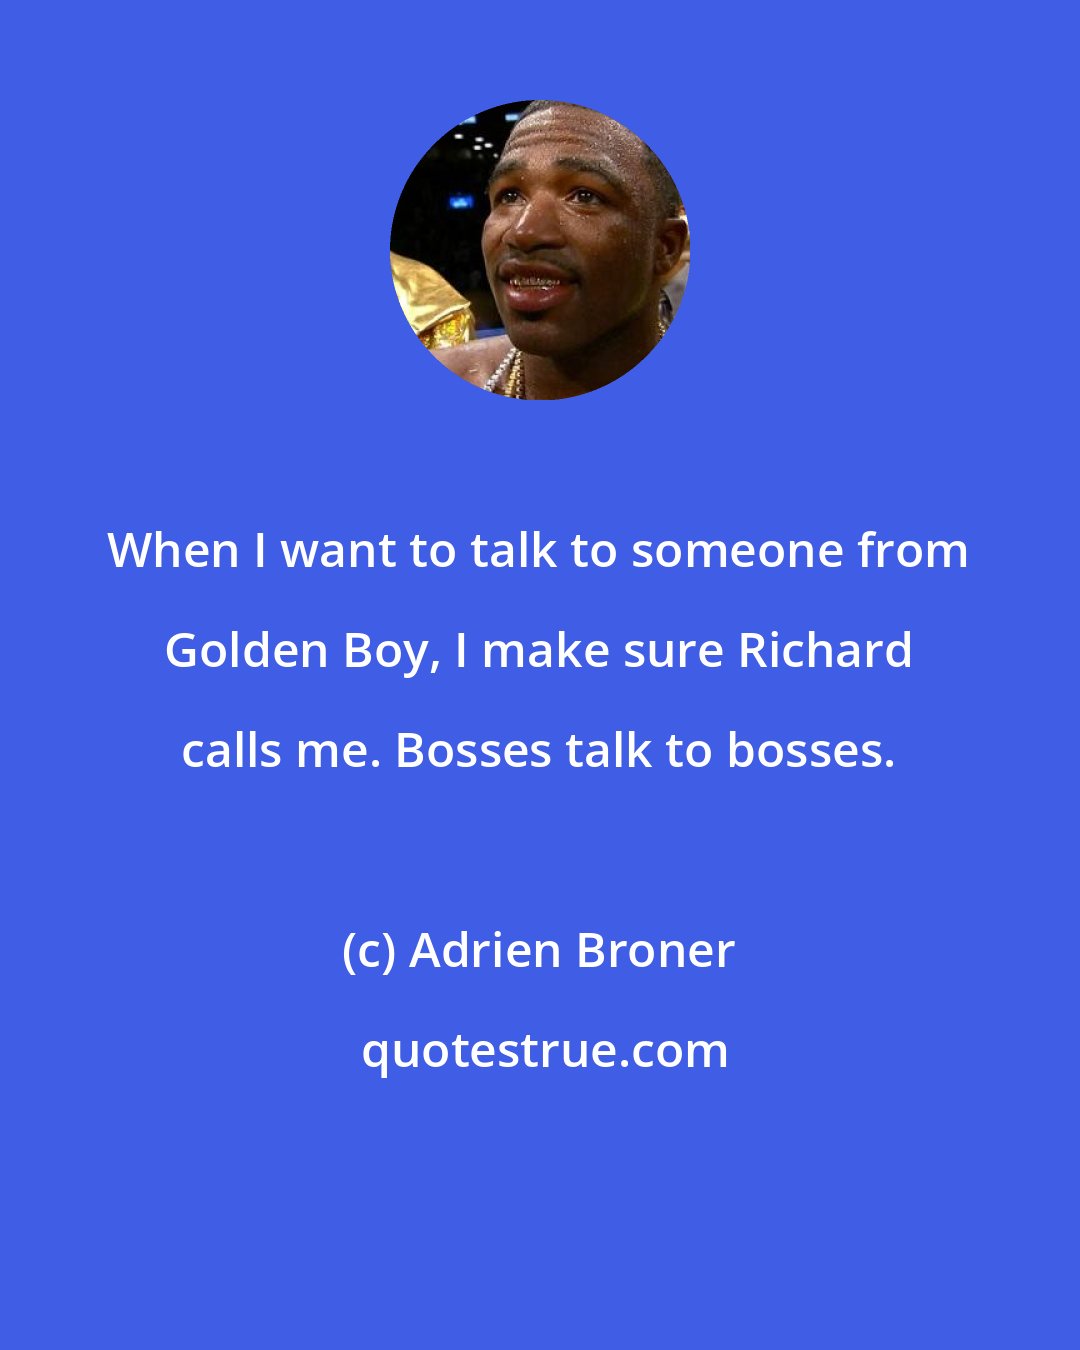 Adrien Broner: When I want to talk to someone from Golden Boy, I make sure Richard calls me. Bosses talk to bosses.